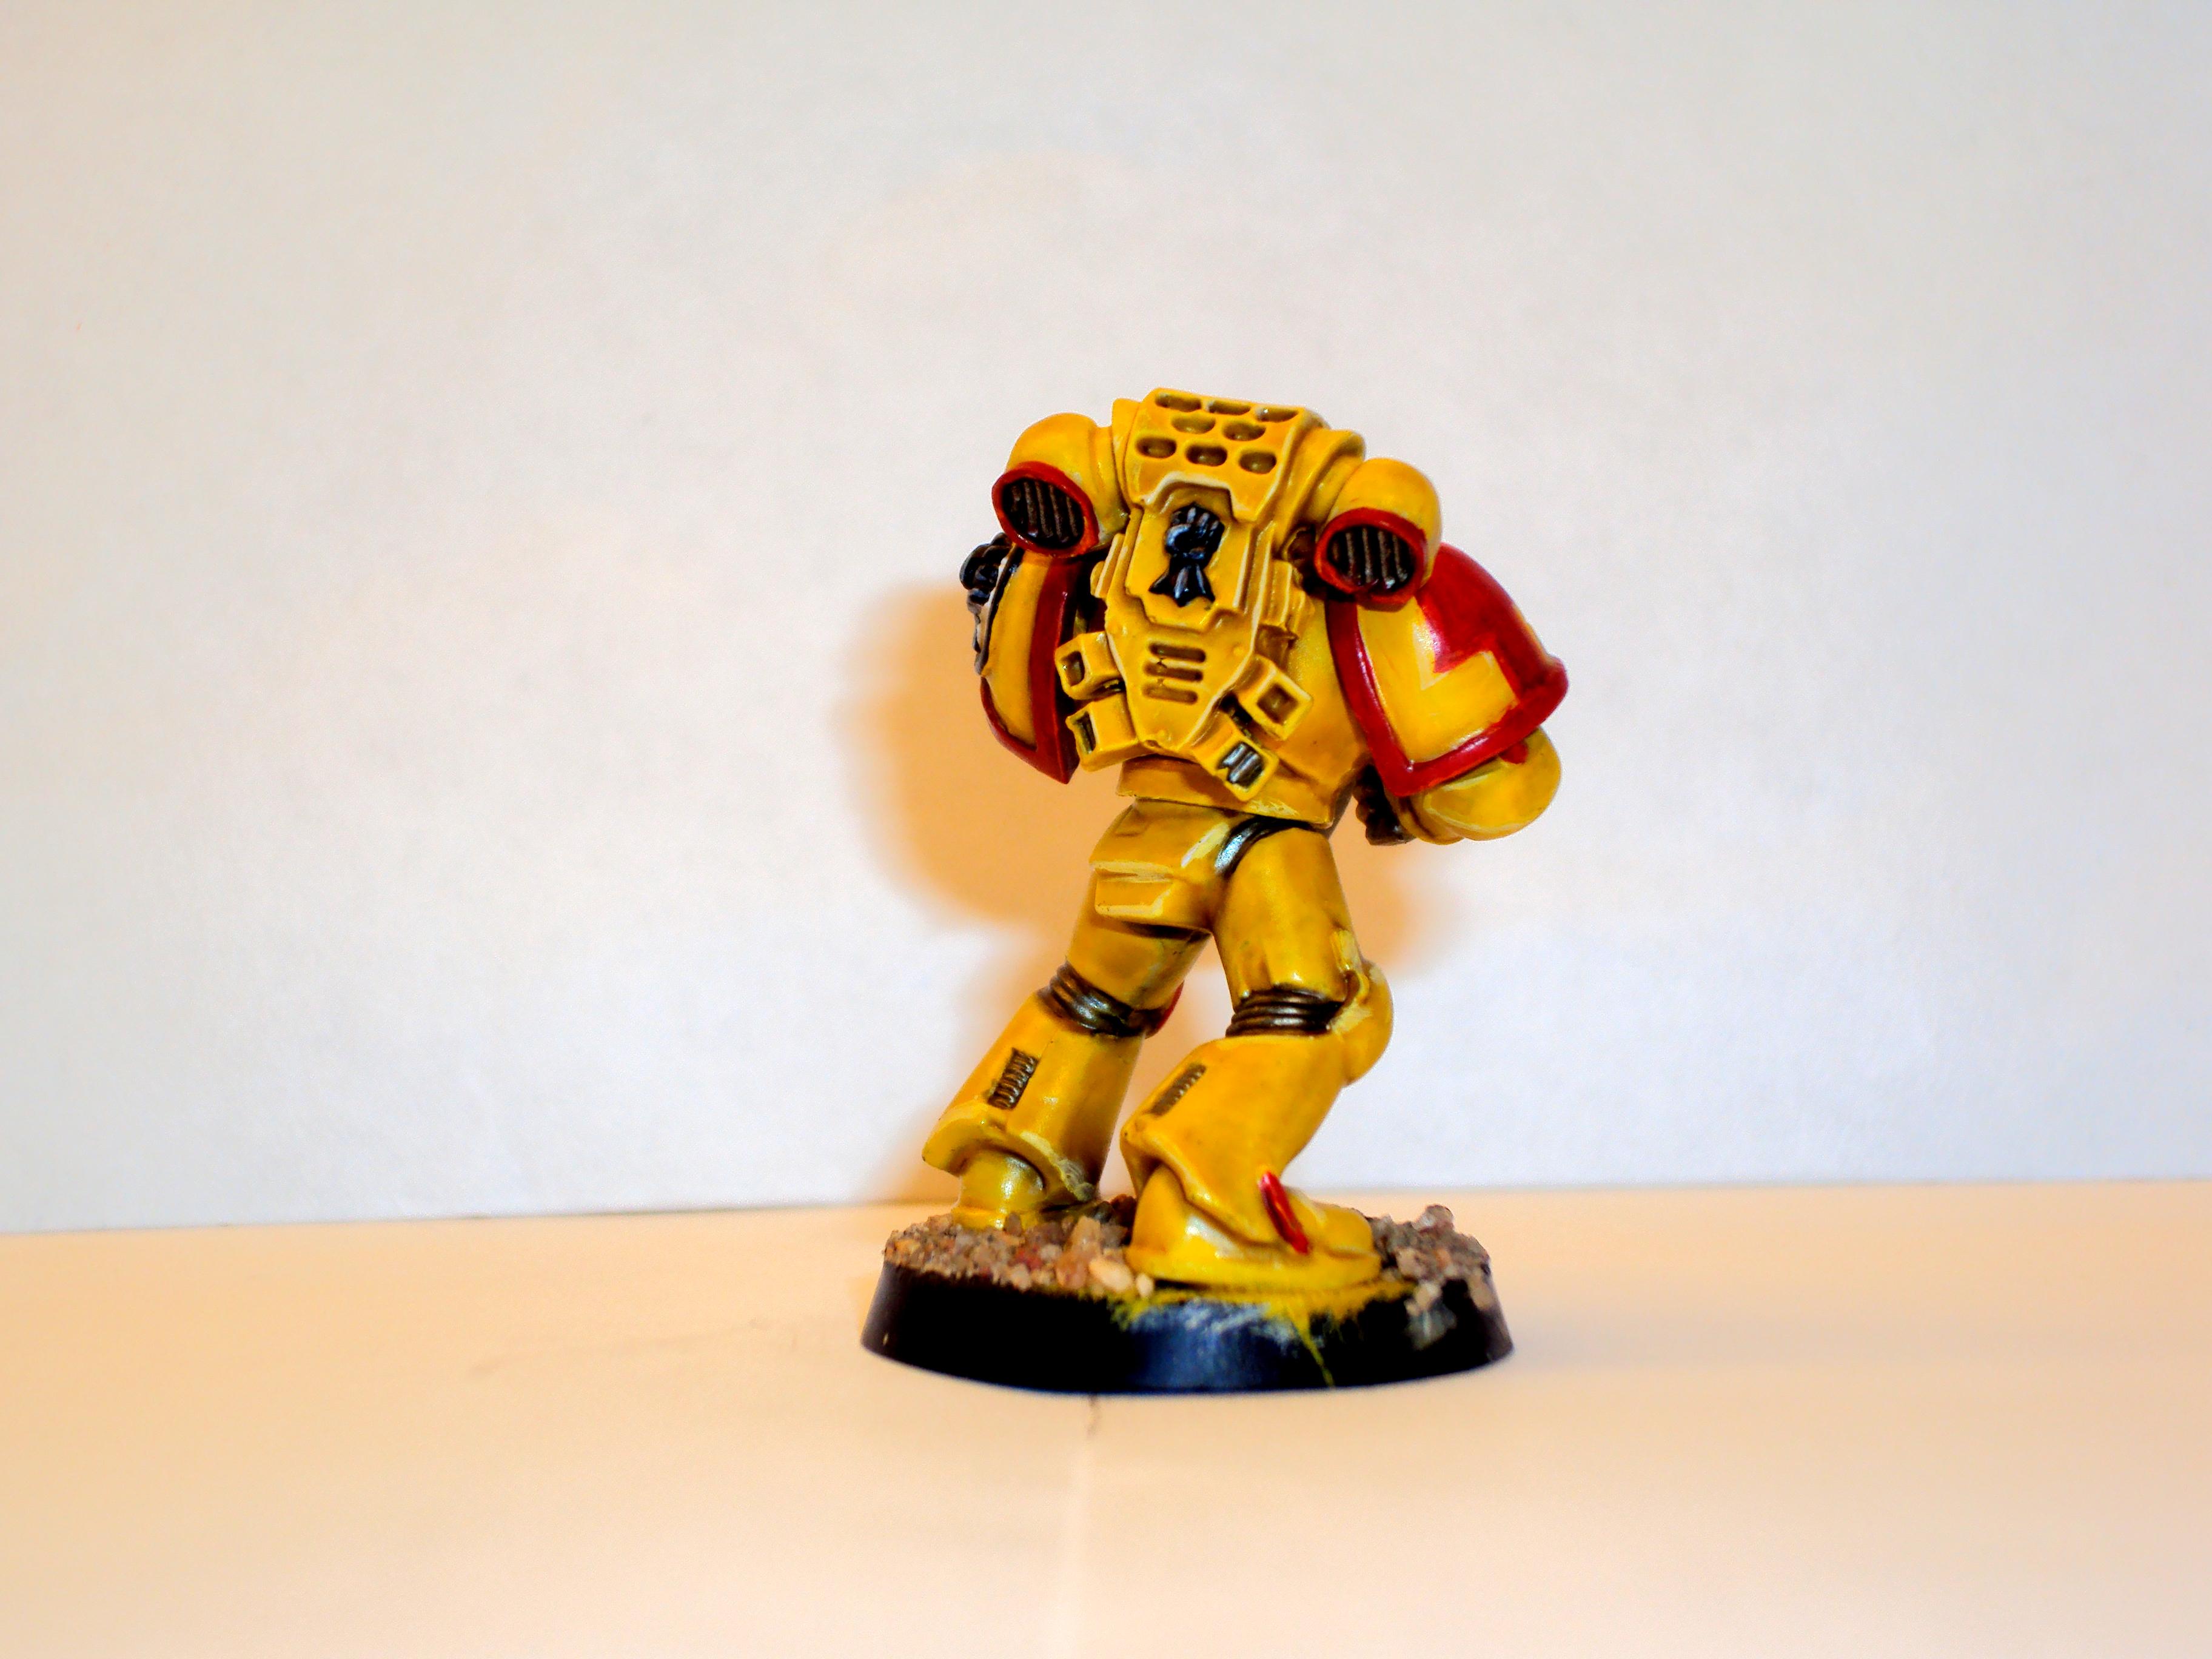 Imperial fist 4